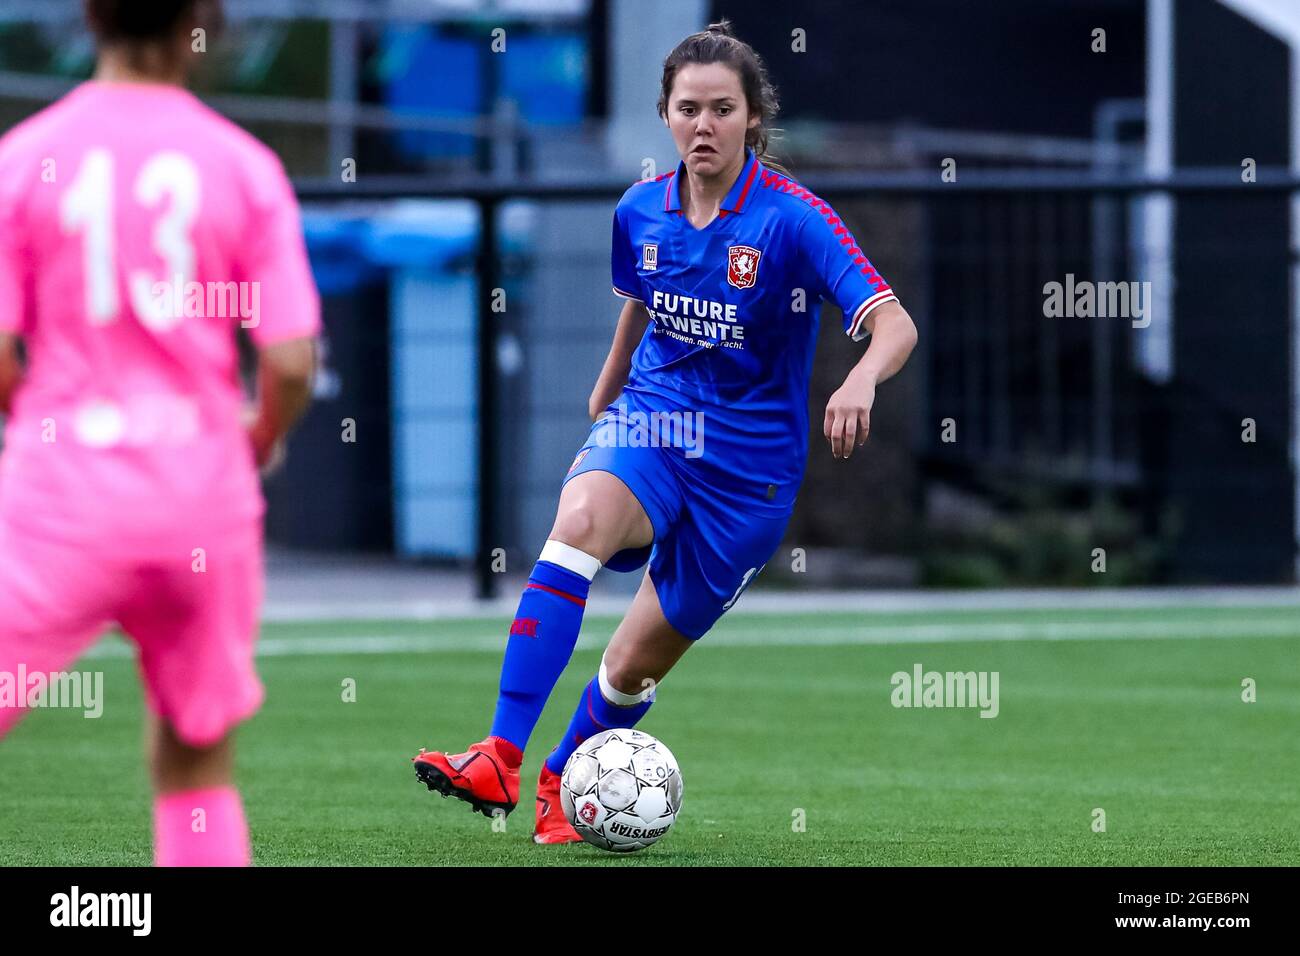 ENSCHEDE, NETHERLANDS - AUGUST 18: Lotje de Keijzer of FC Twente during the  UEFA Women's Champions League First Qualifying Round match between FC Twente  and FC Nike at Sportclub Enschede on August